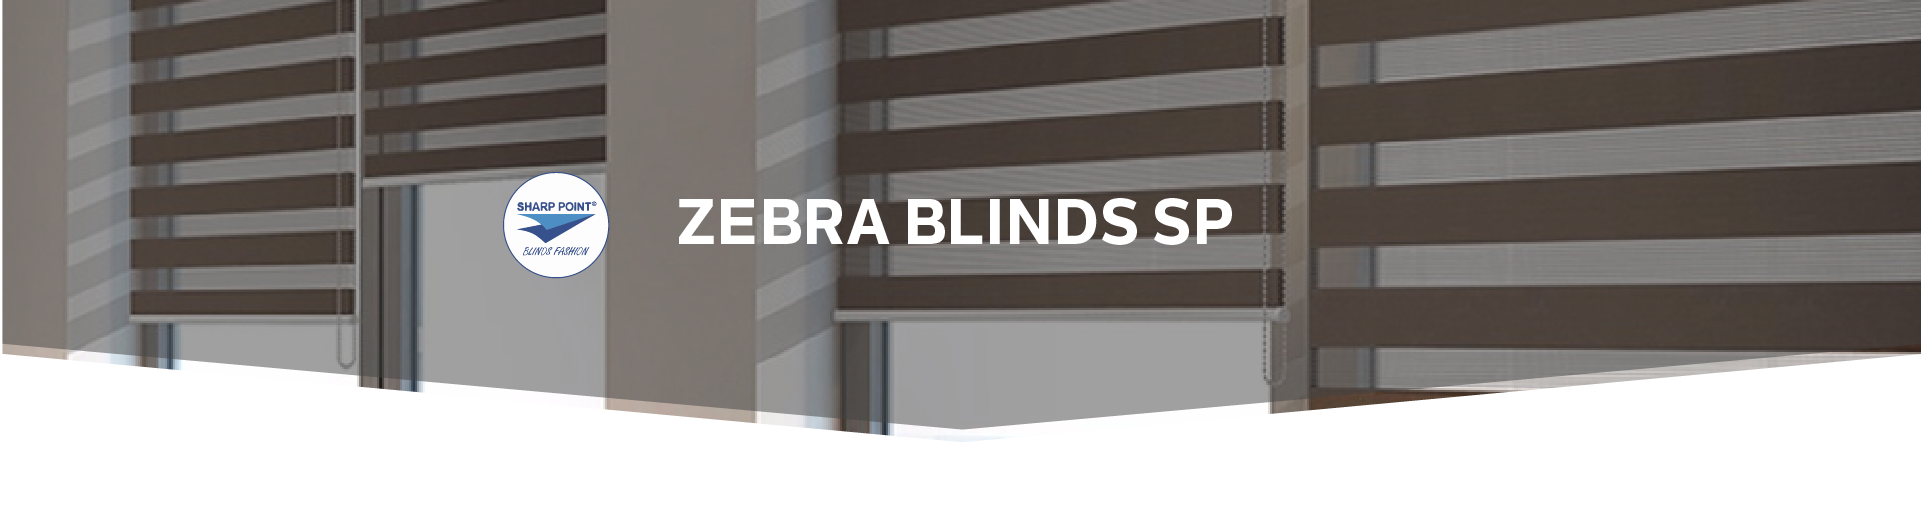 ZEBRA BLINDS SP Cover by Halcyon Interior